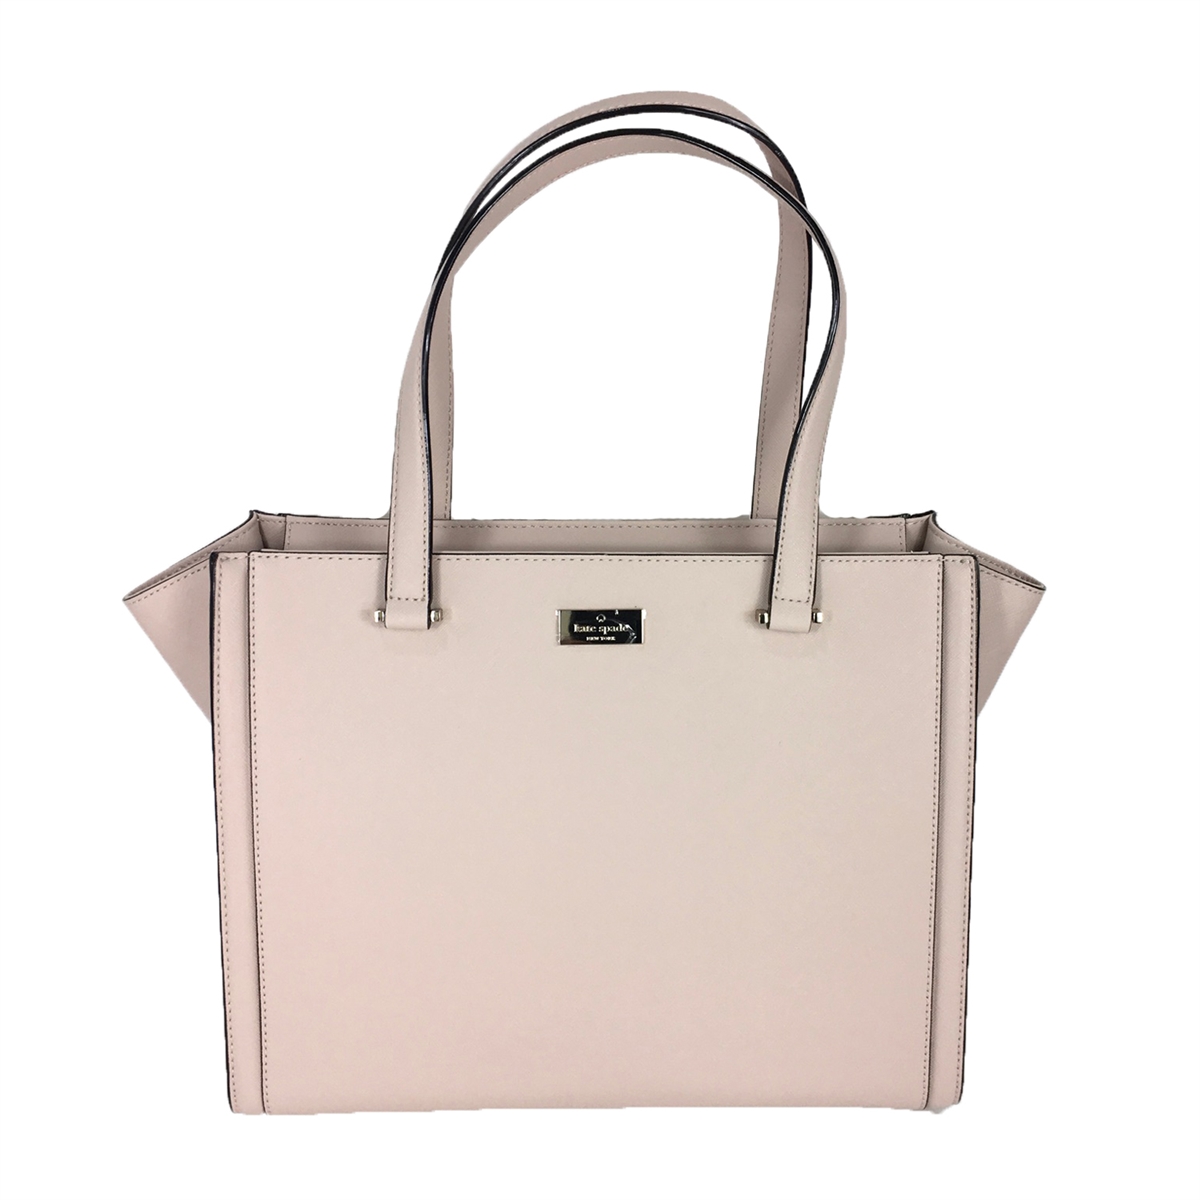 Kate Spade New York Airel Cove Street Saffiano Leather Beige Tote